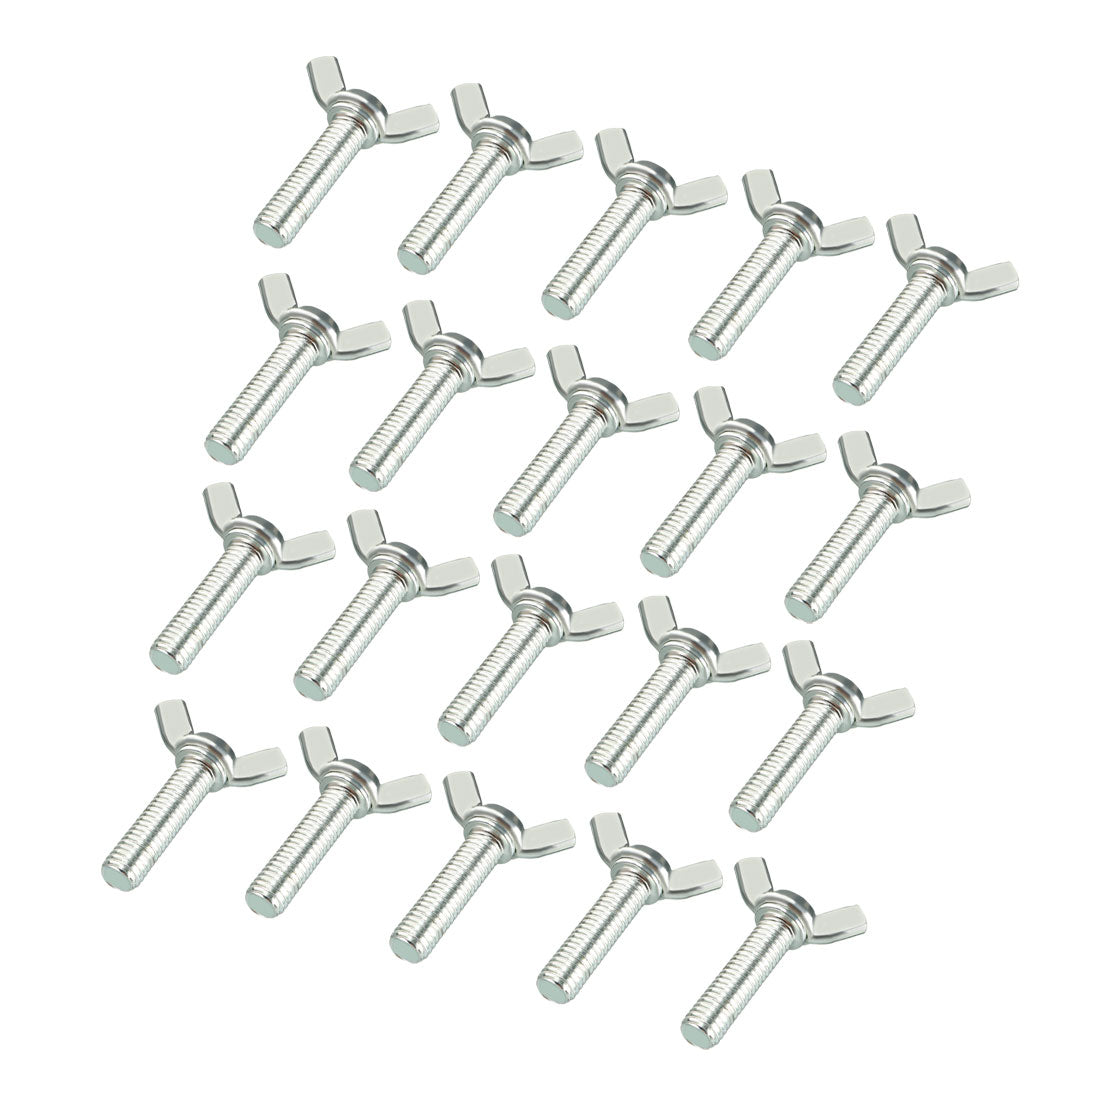 uxcell Uxcell Wingbolt Butterfly Wing Thumb Hand Screws Bolts M8x30mm 1.25mm Pitch Carbon Steel 20pcs